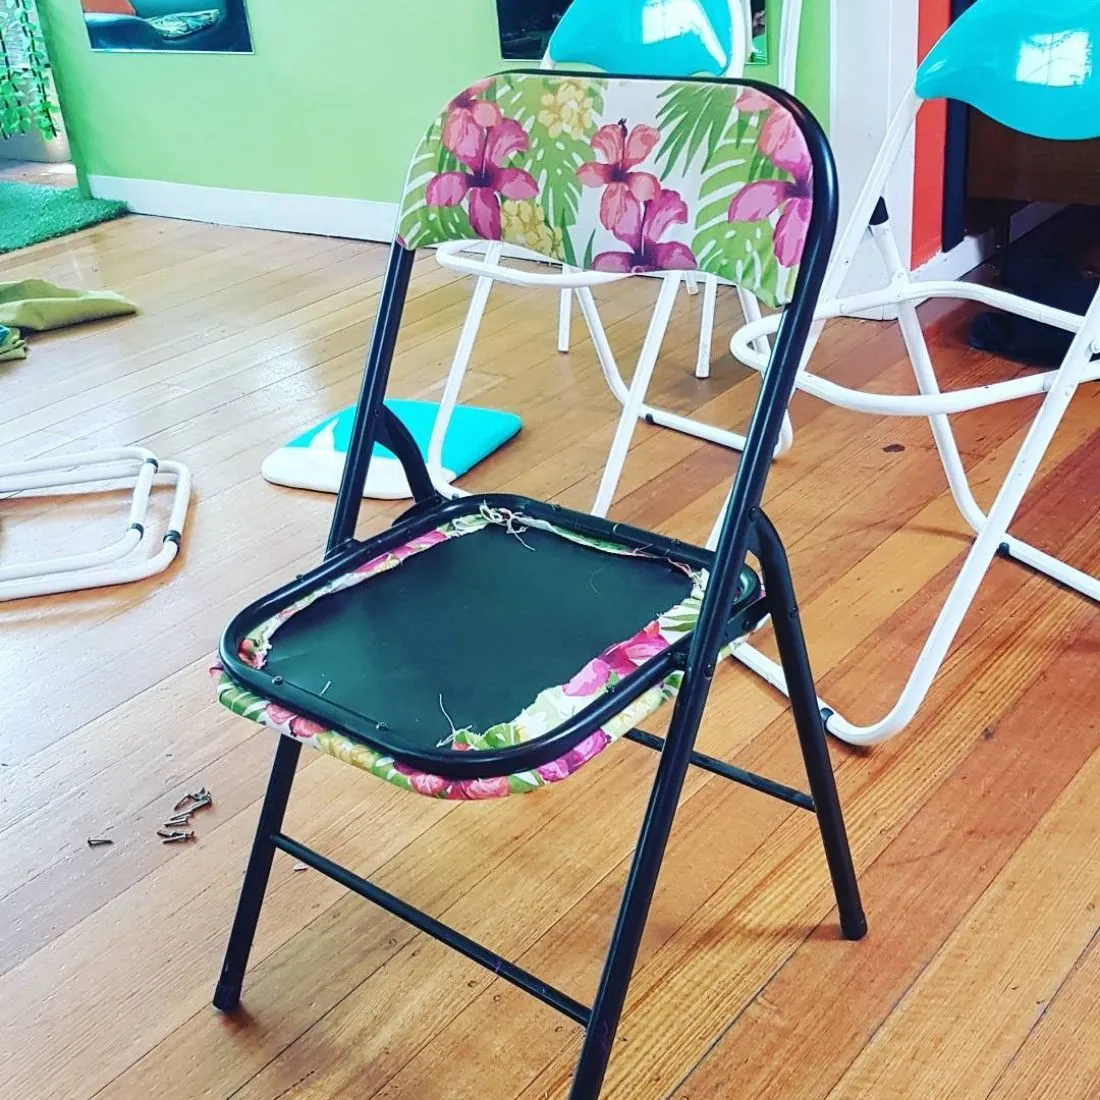 attempting to re-upholster chairs